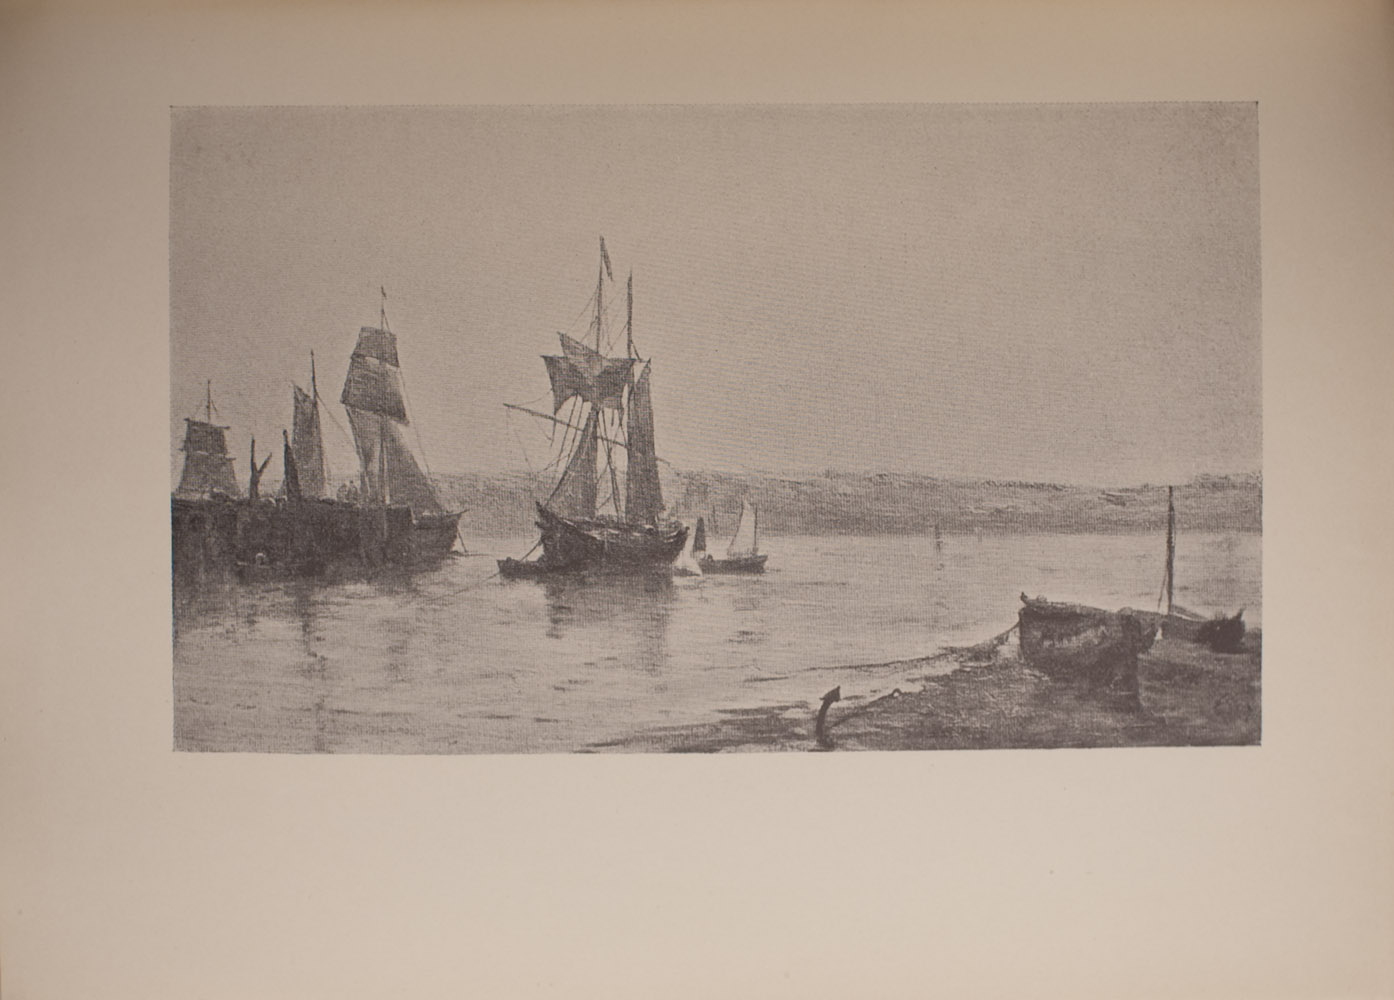 The image is of a waterside scene In the left middle ground are three large anchored boats with sails Immediately to the right of the larger boats is a small boat with sails In the right foreground there are two small boats with no sails anchored to the shoreline In the background another shoreline is visible The image is horizontally displayed